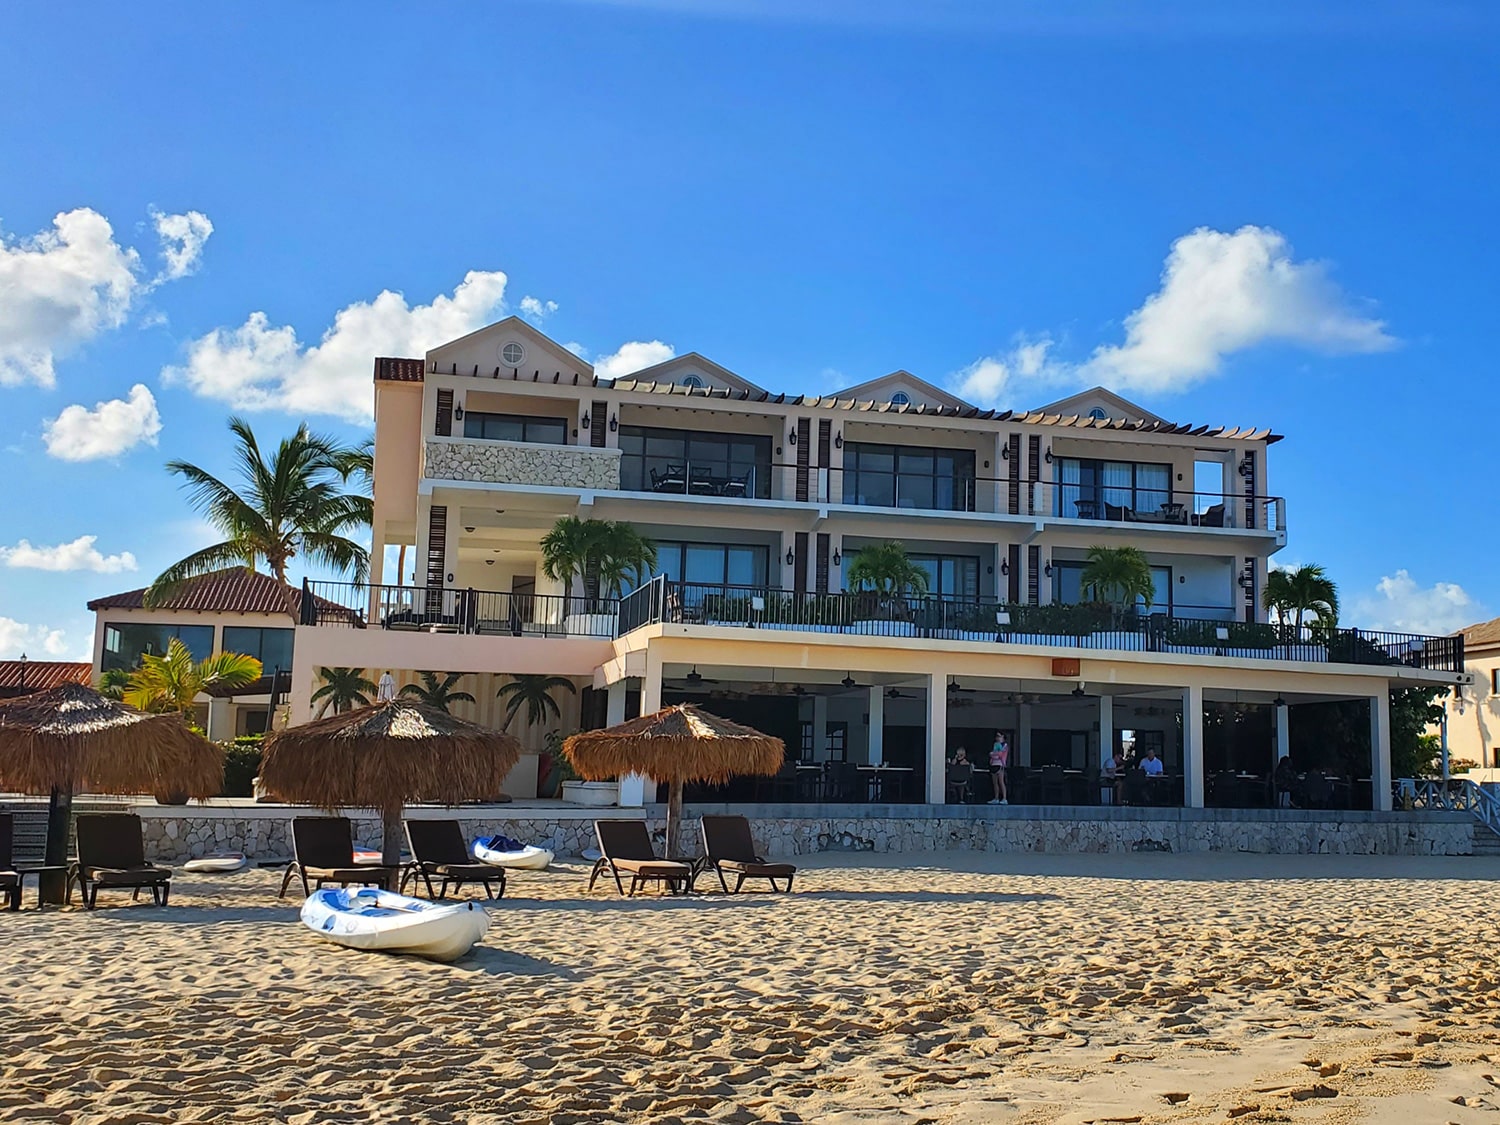 The recently added oceanfront suites at Frangipani Beach Resort, located on Meads Bay in Anguilla.